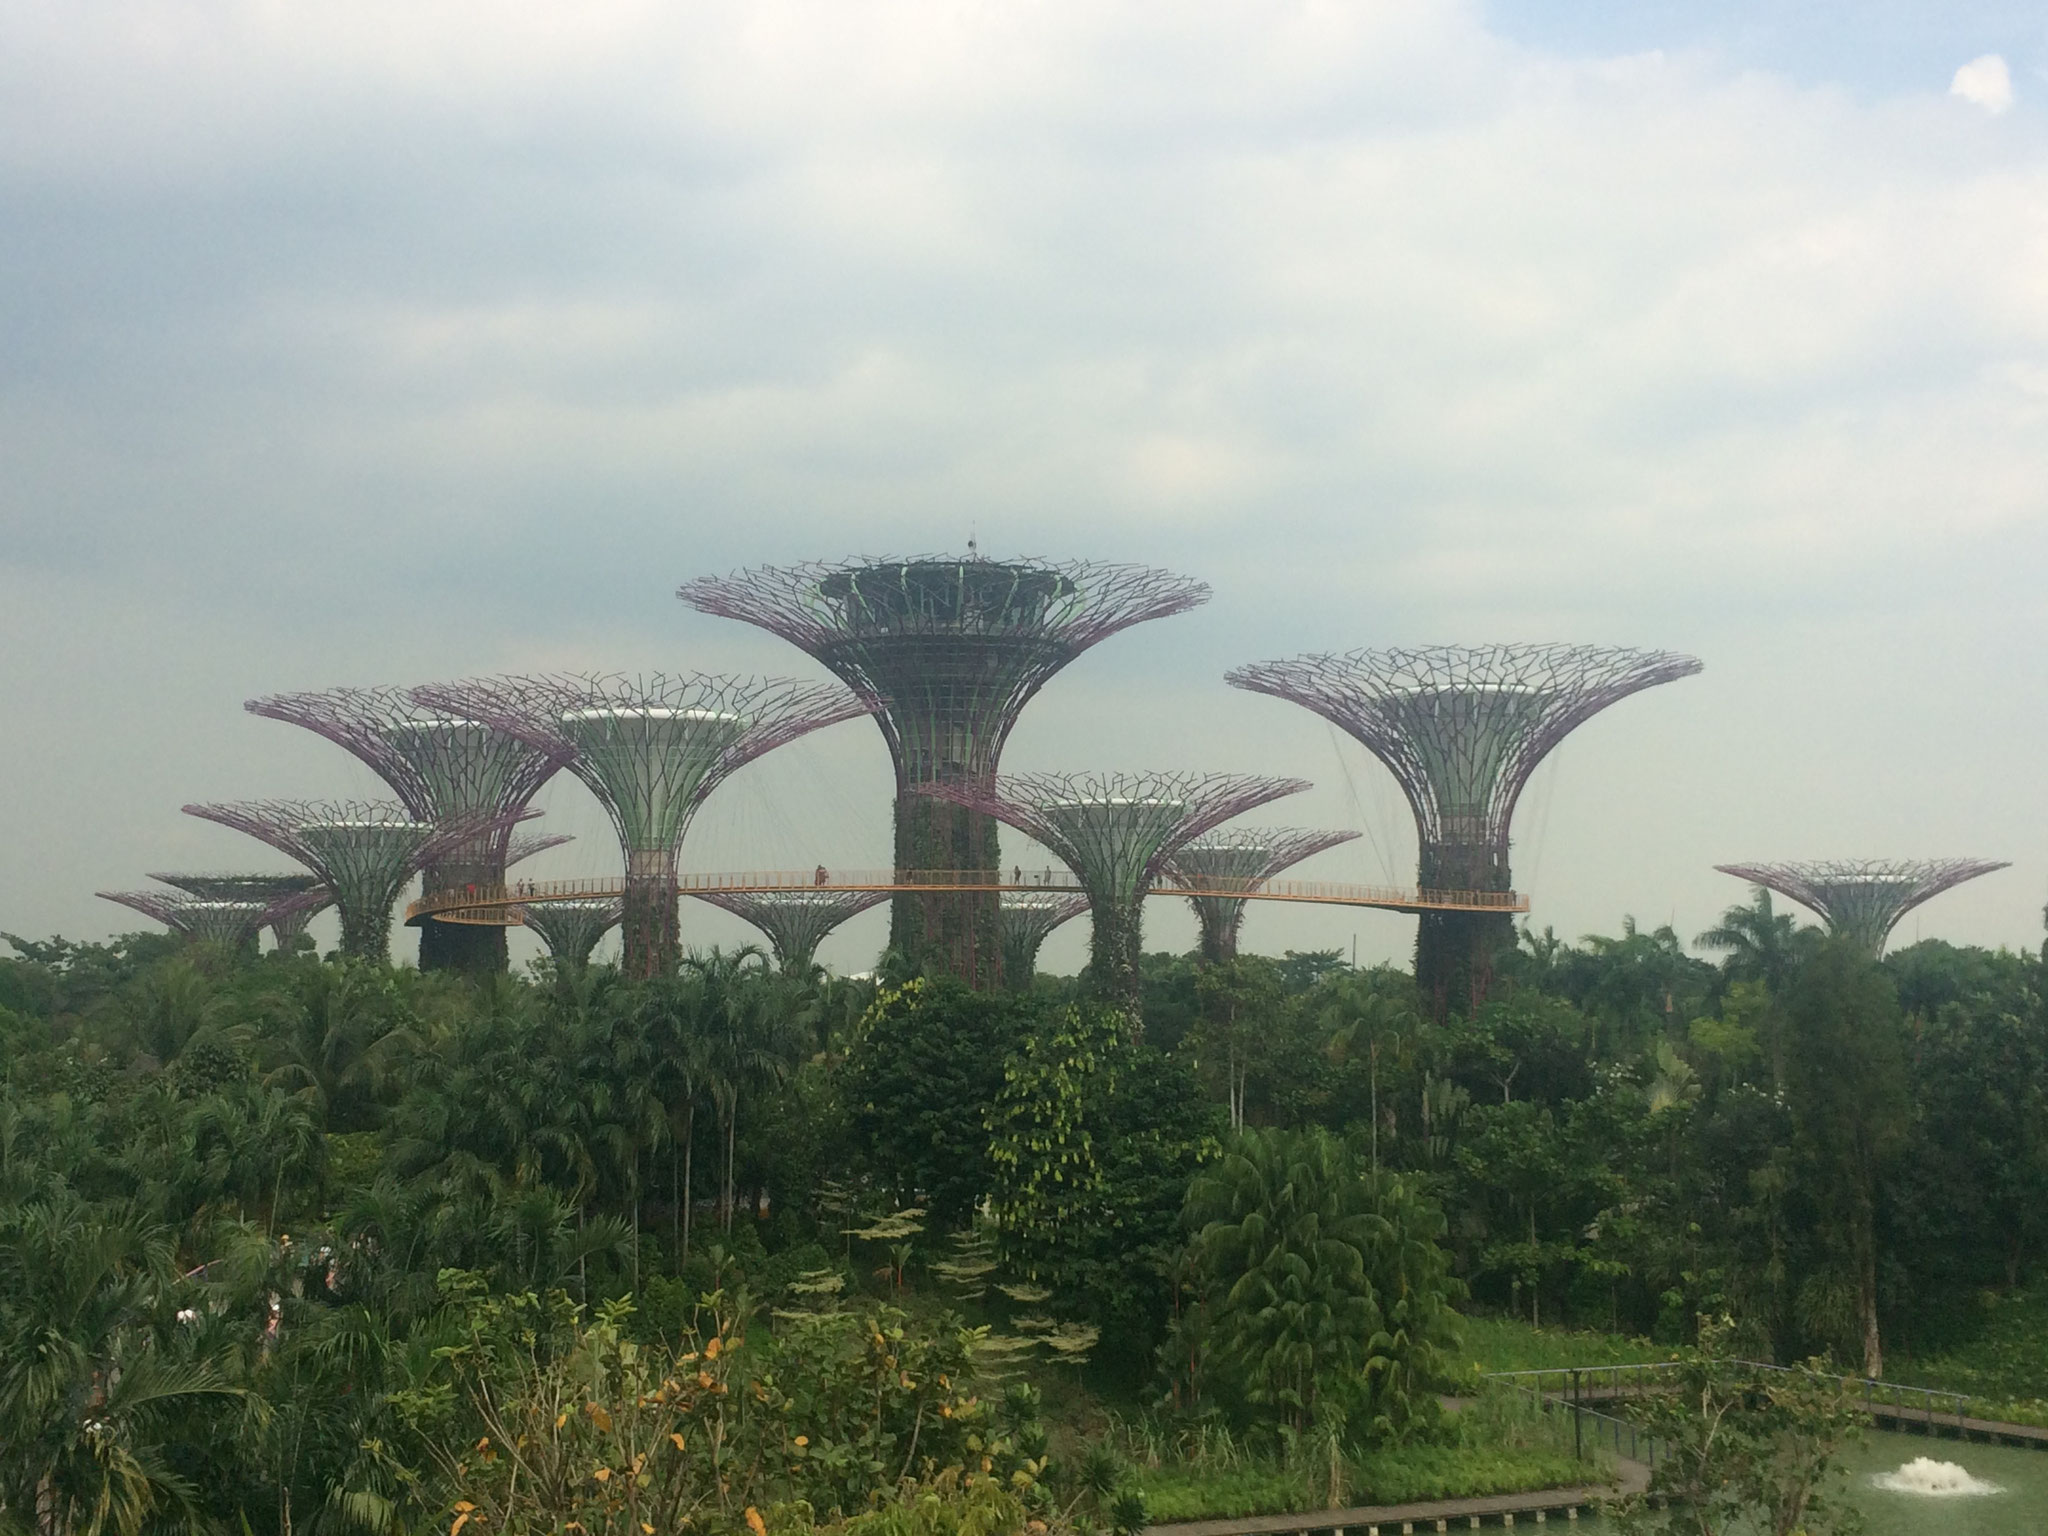 Welcome to the "Gardens by the Bay" <3